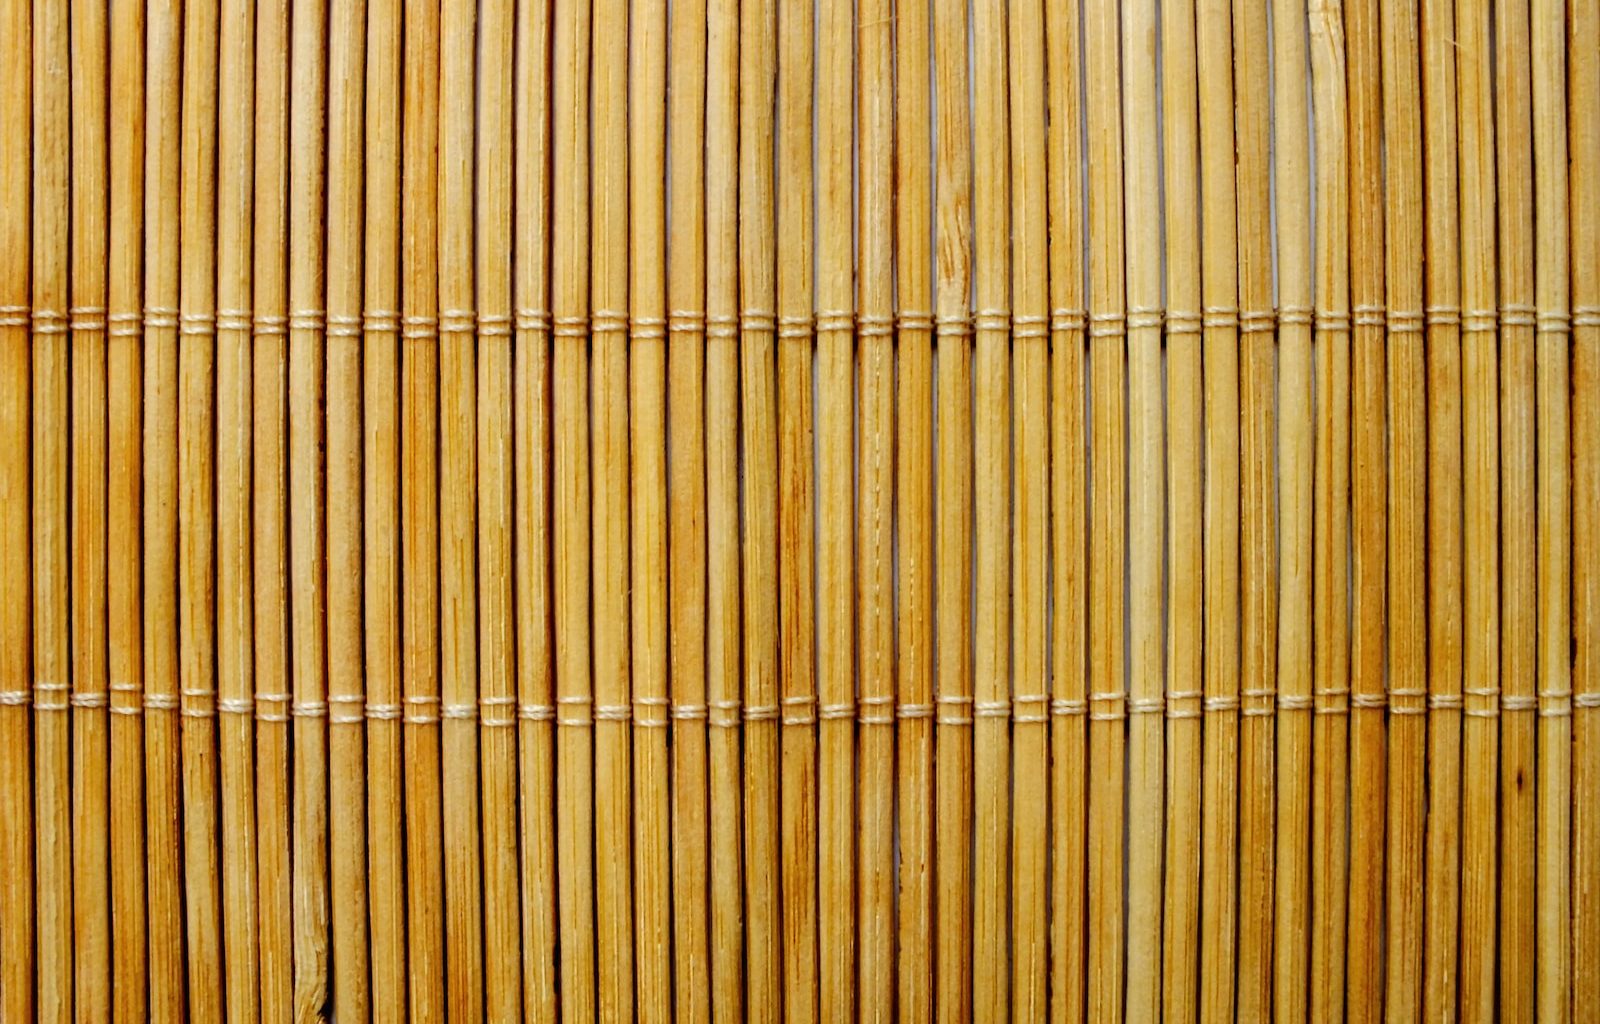 brown bamboo fence